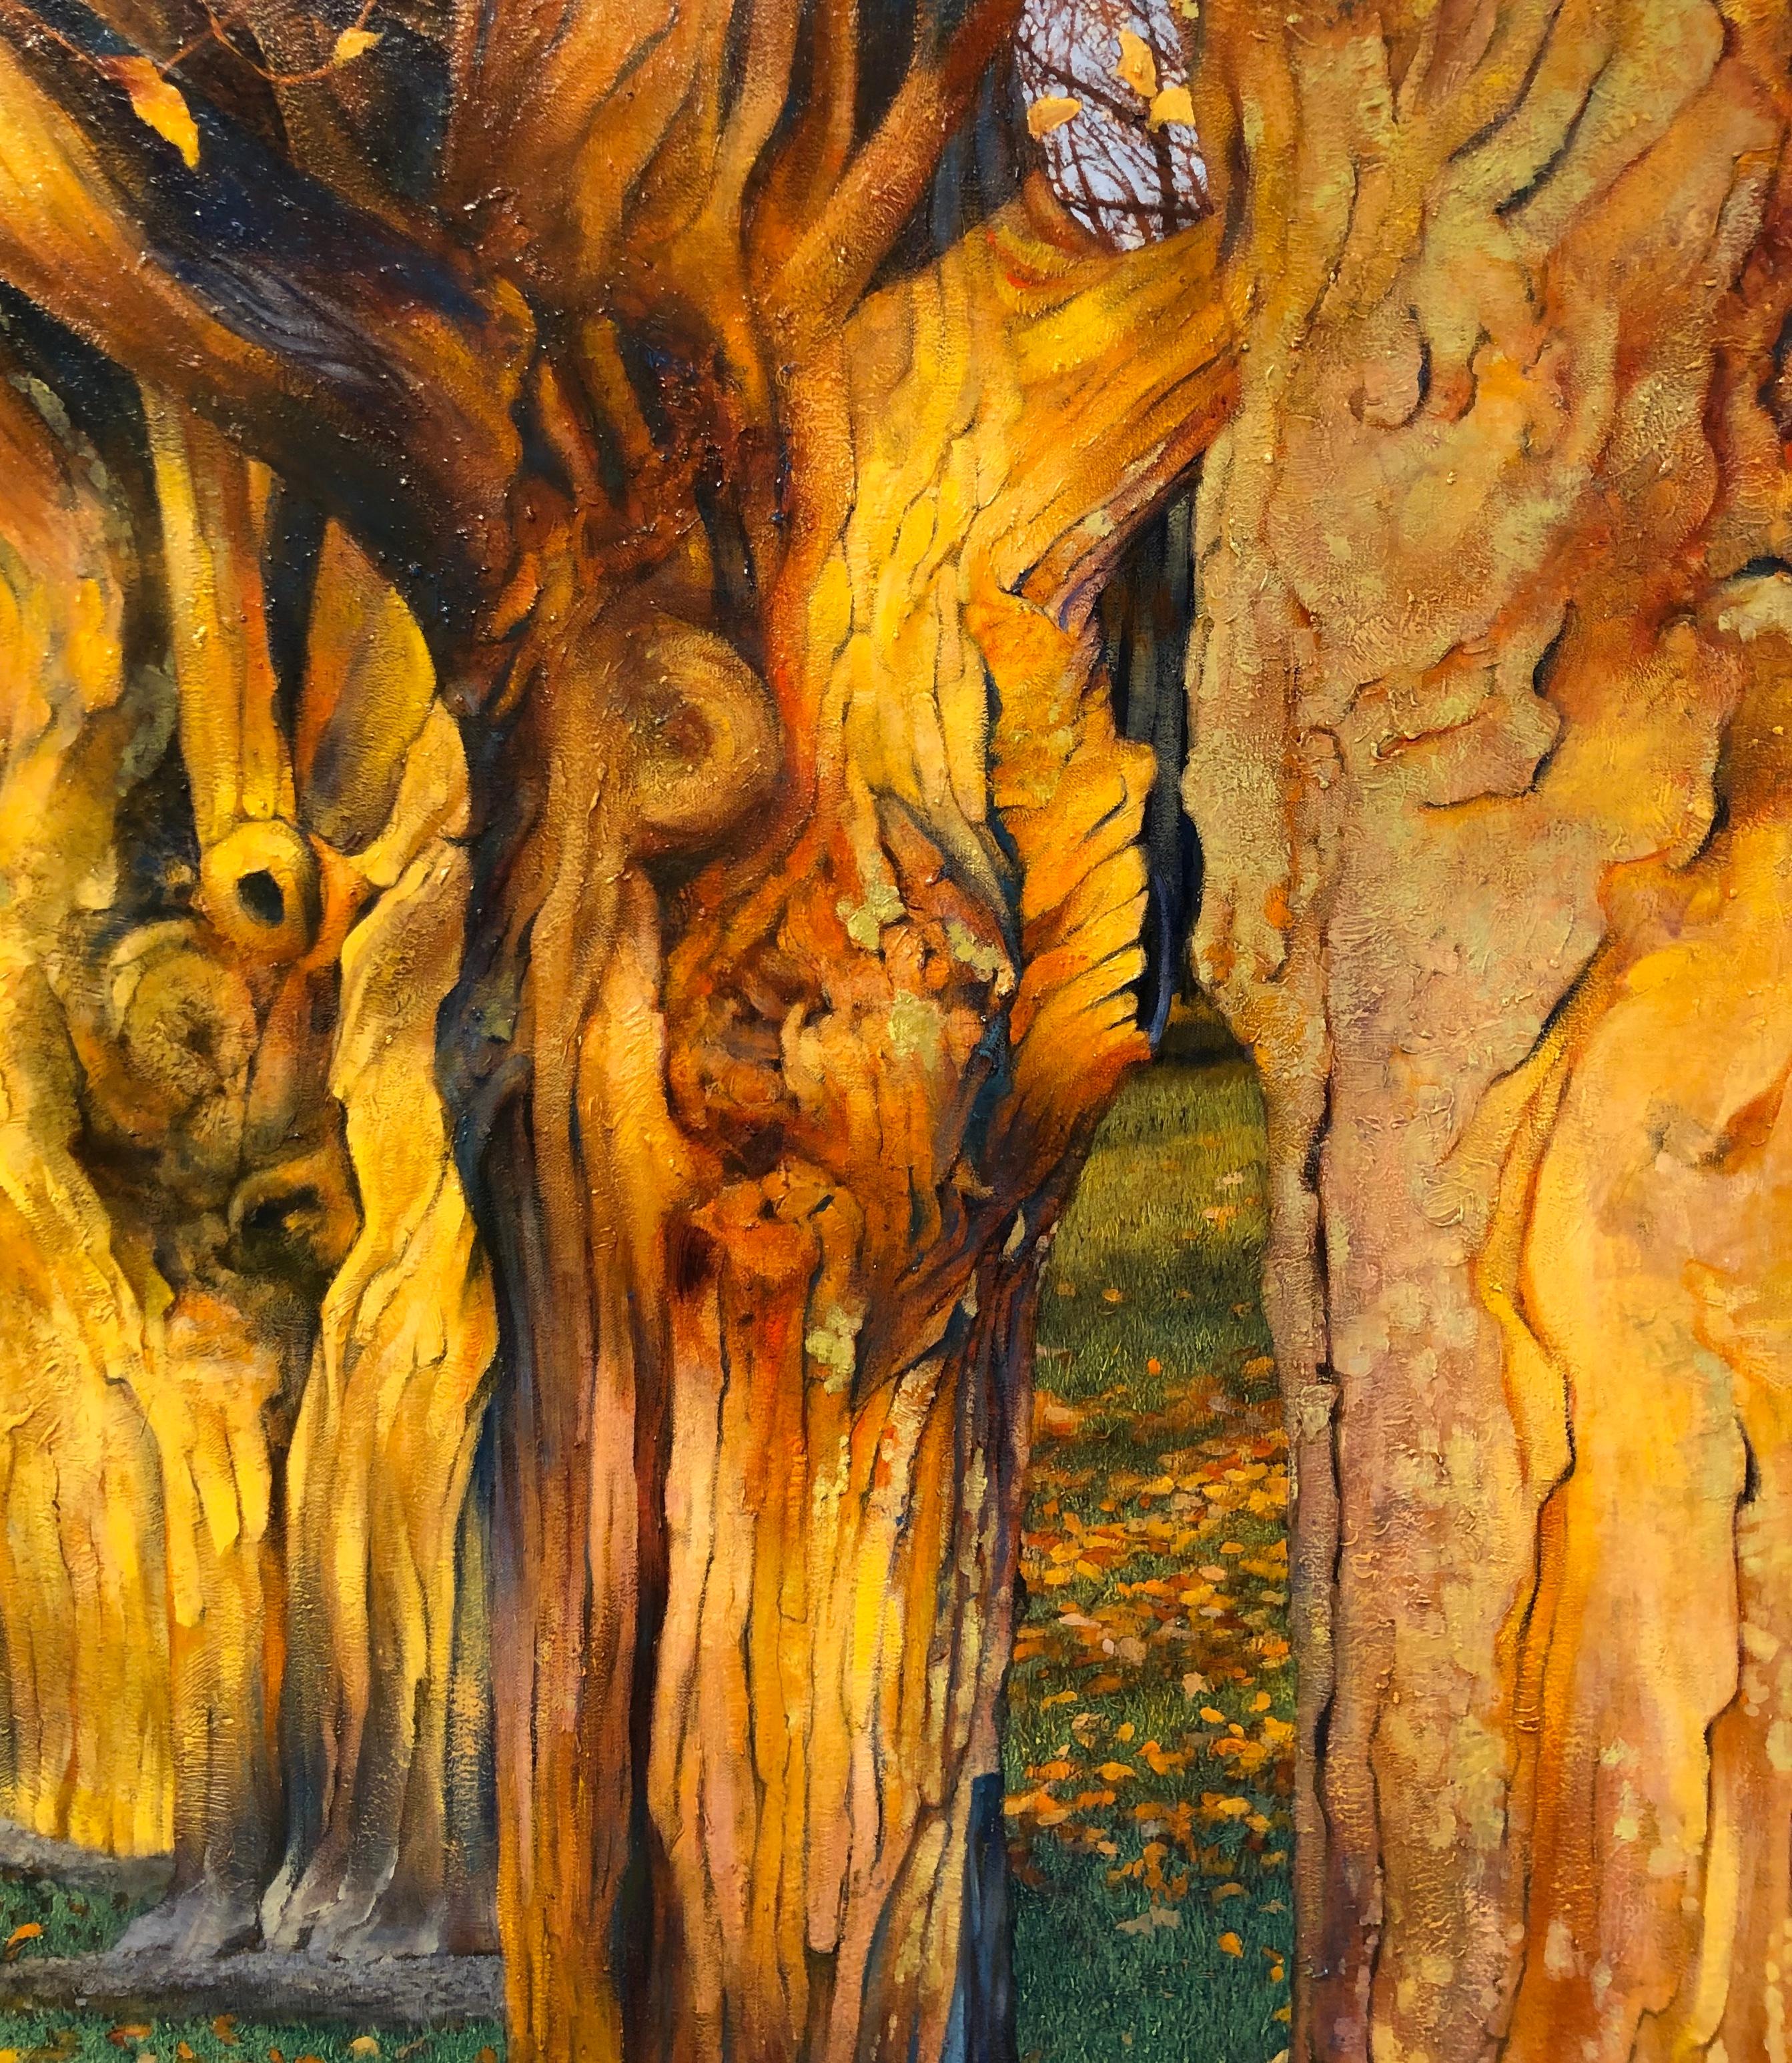 Witness Trees, Sugar Maples Bathed in Afternoon Light, Original Oil On Canvas - Brown Landscape Painting by Deborah Ebbers